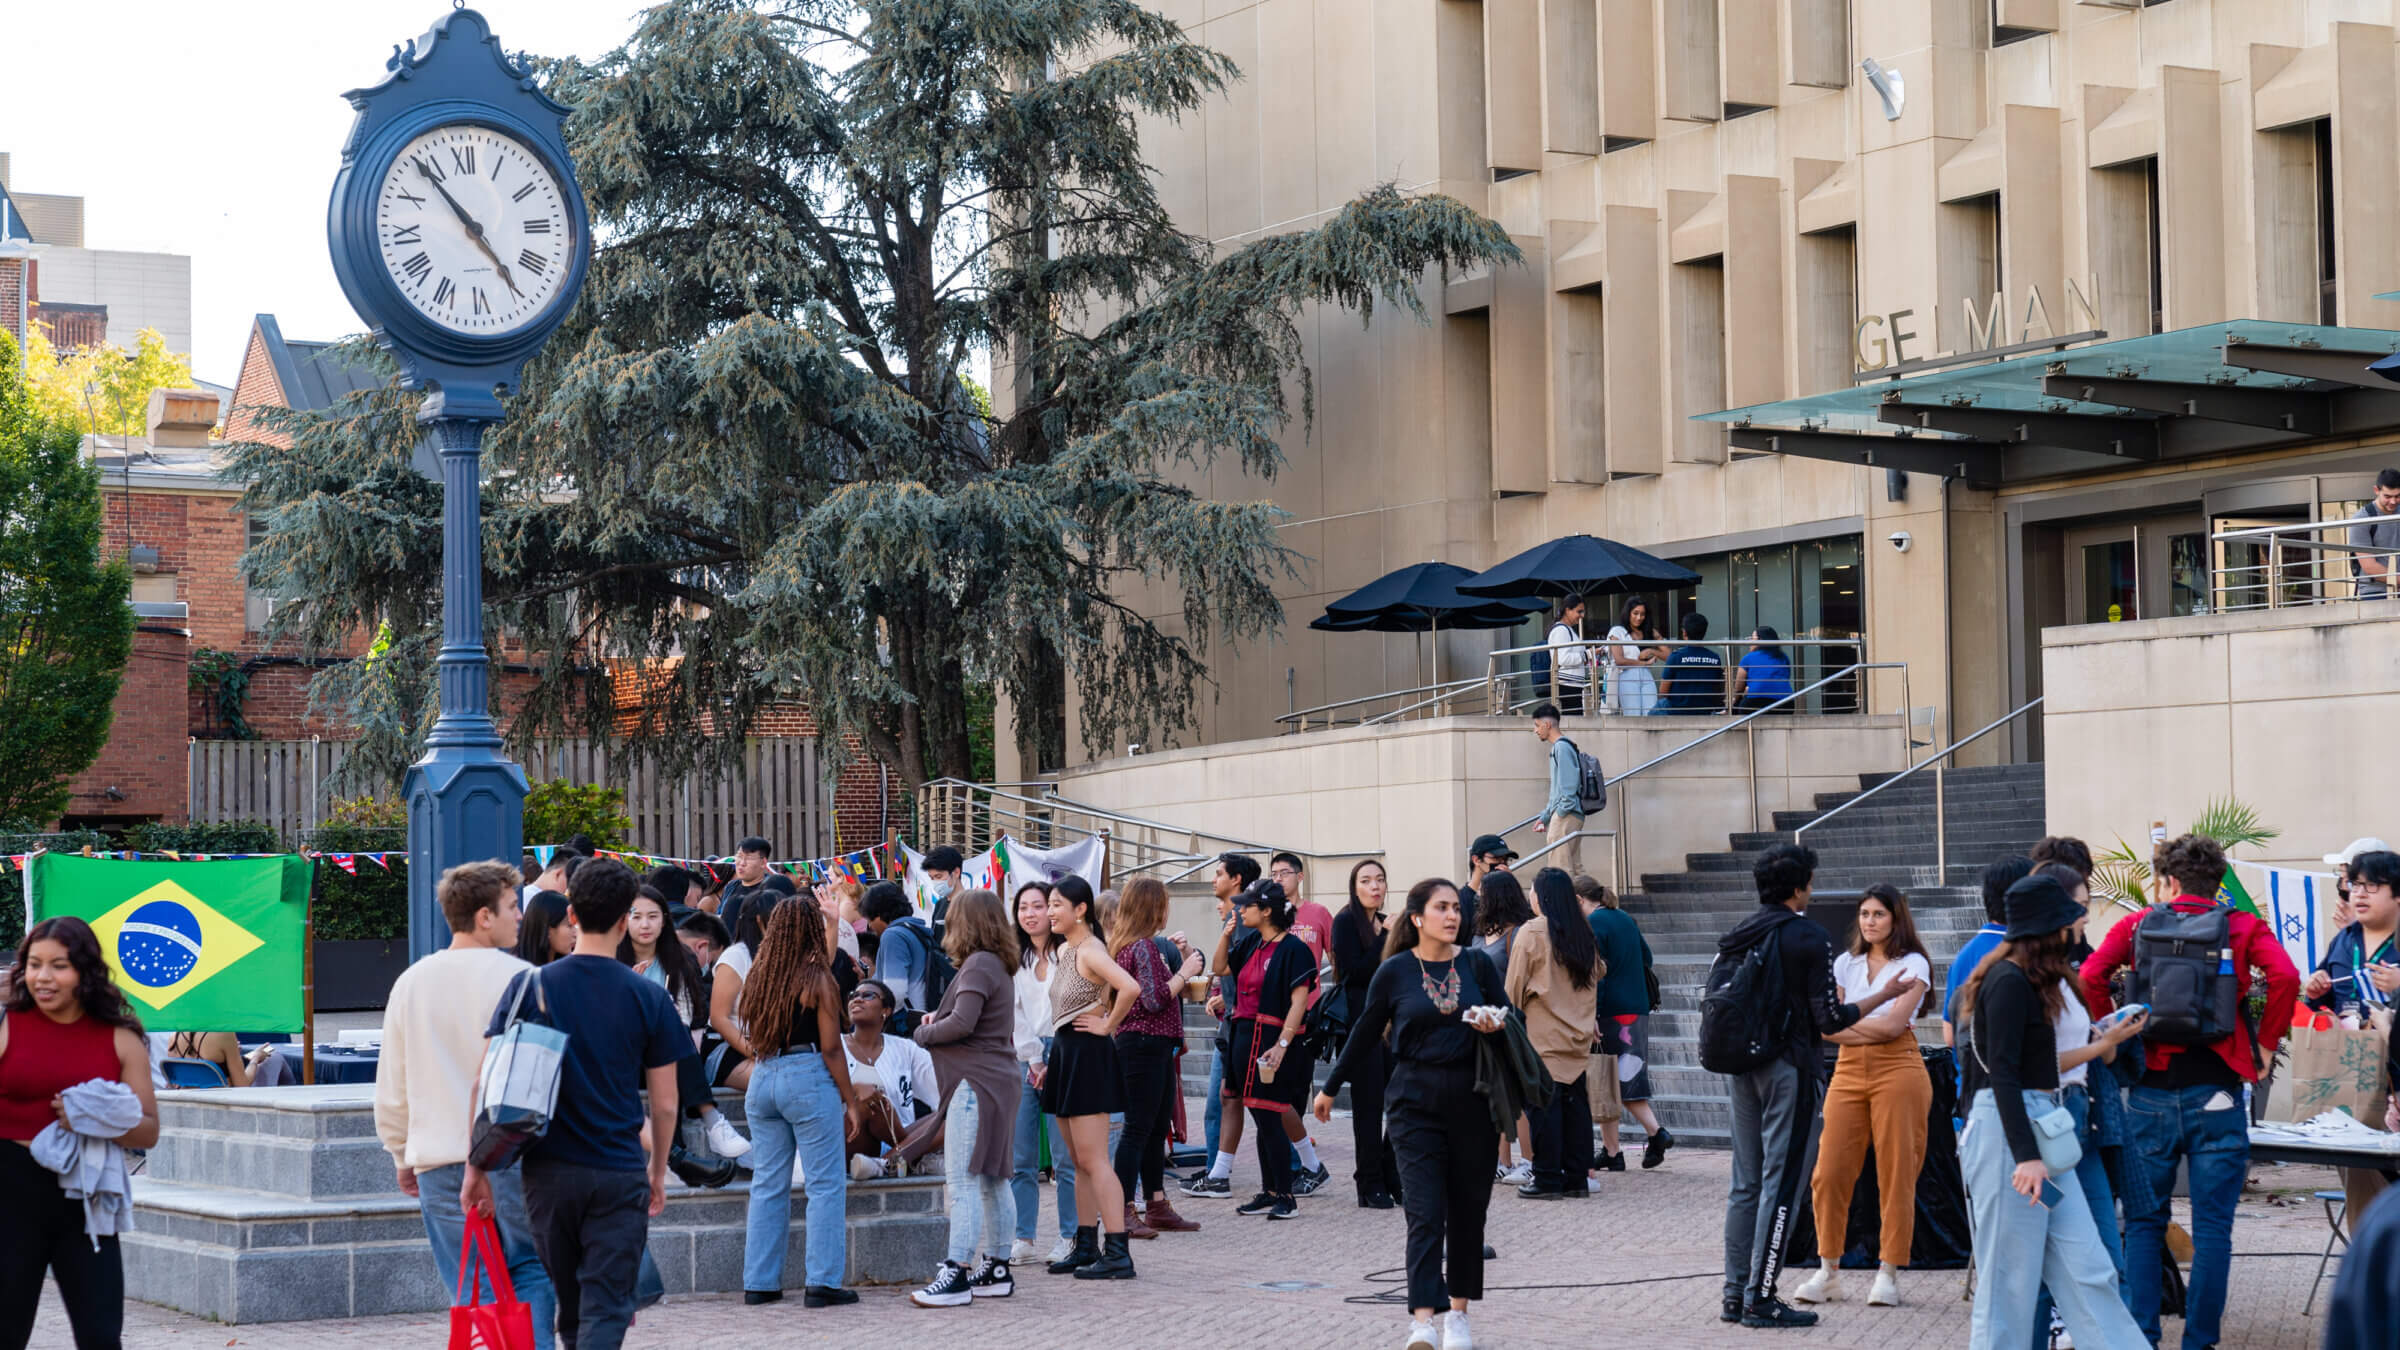 Students mingle during an event at Kogan Plaza, in the center of George Washington University's campus.